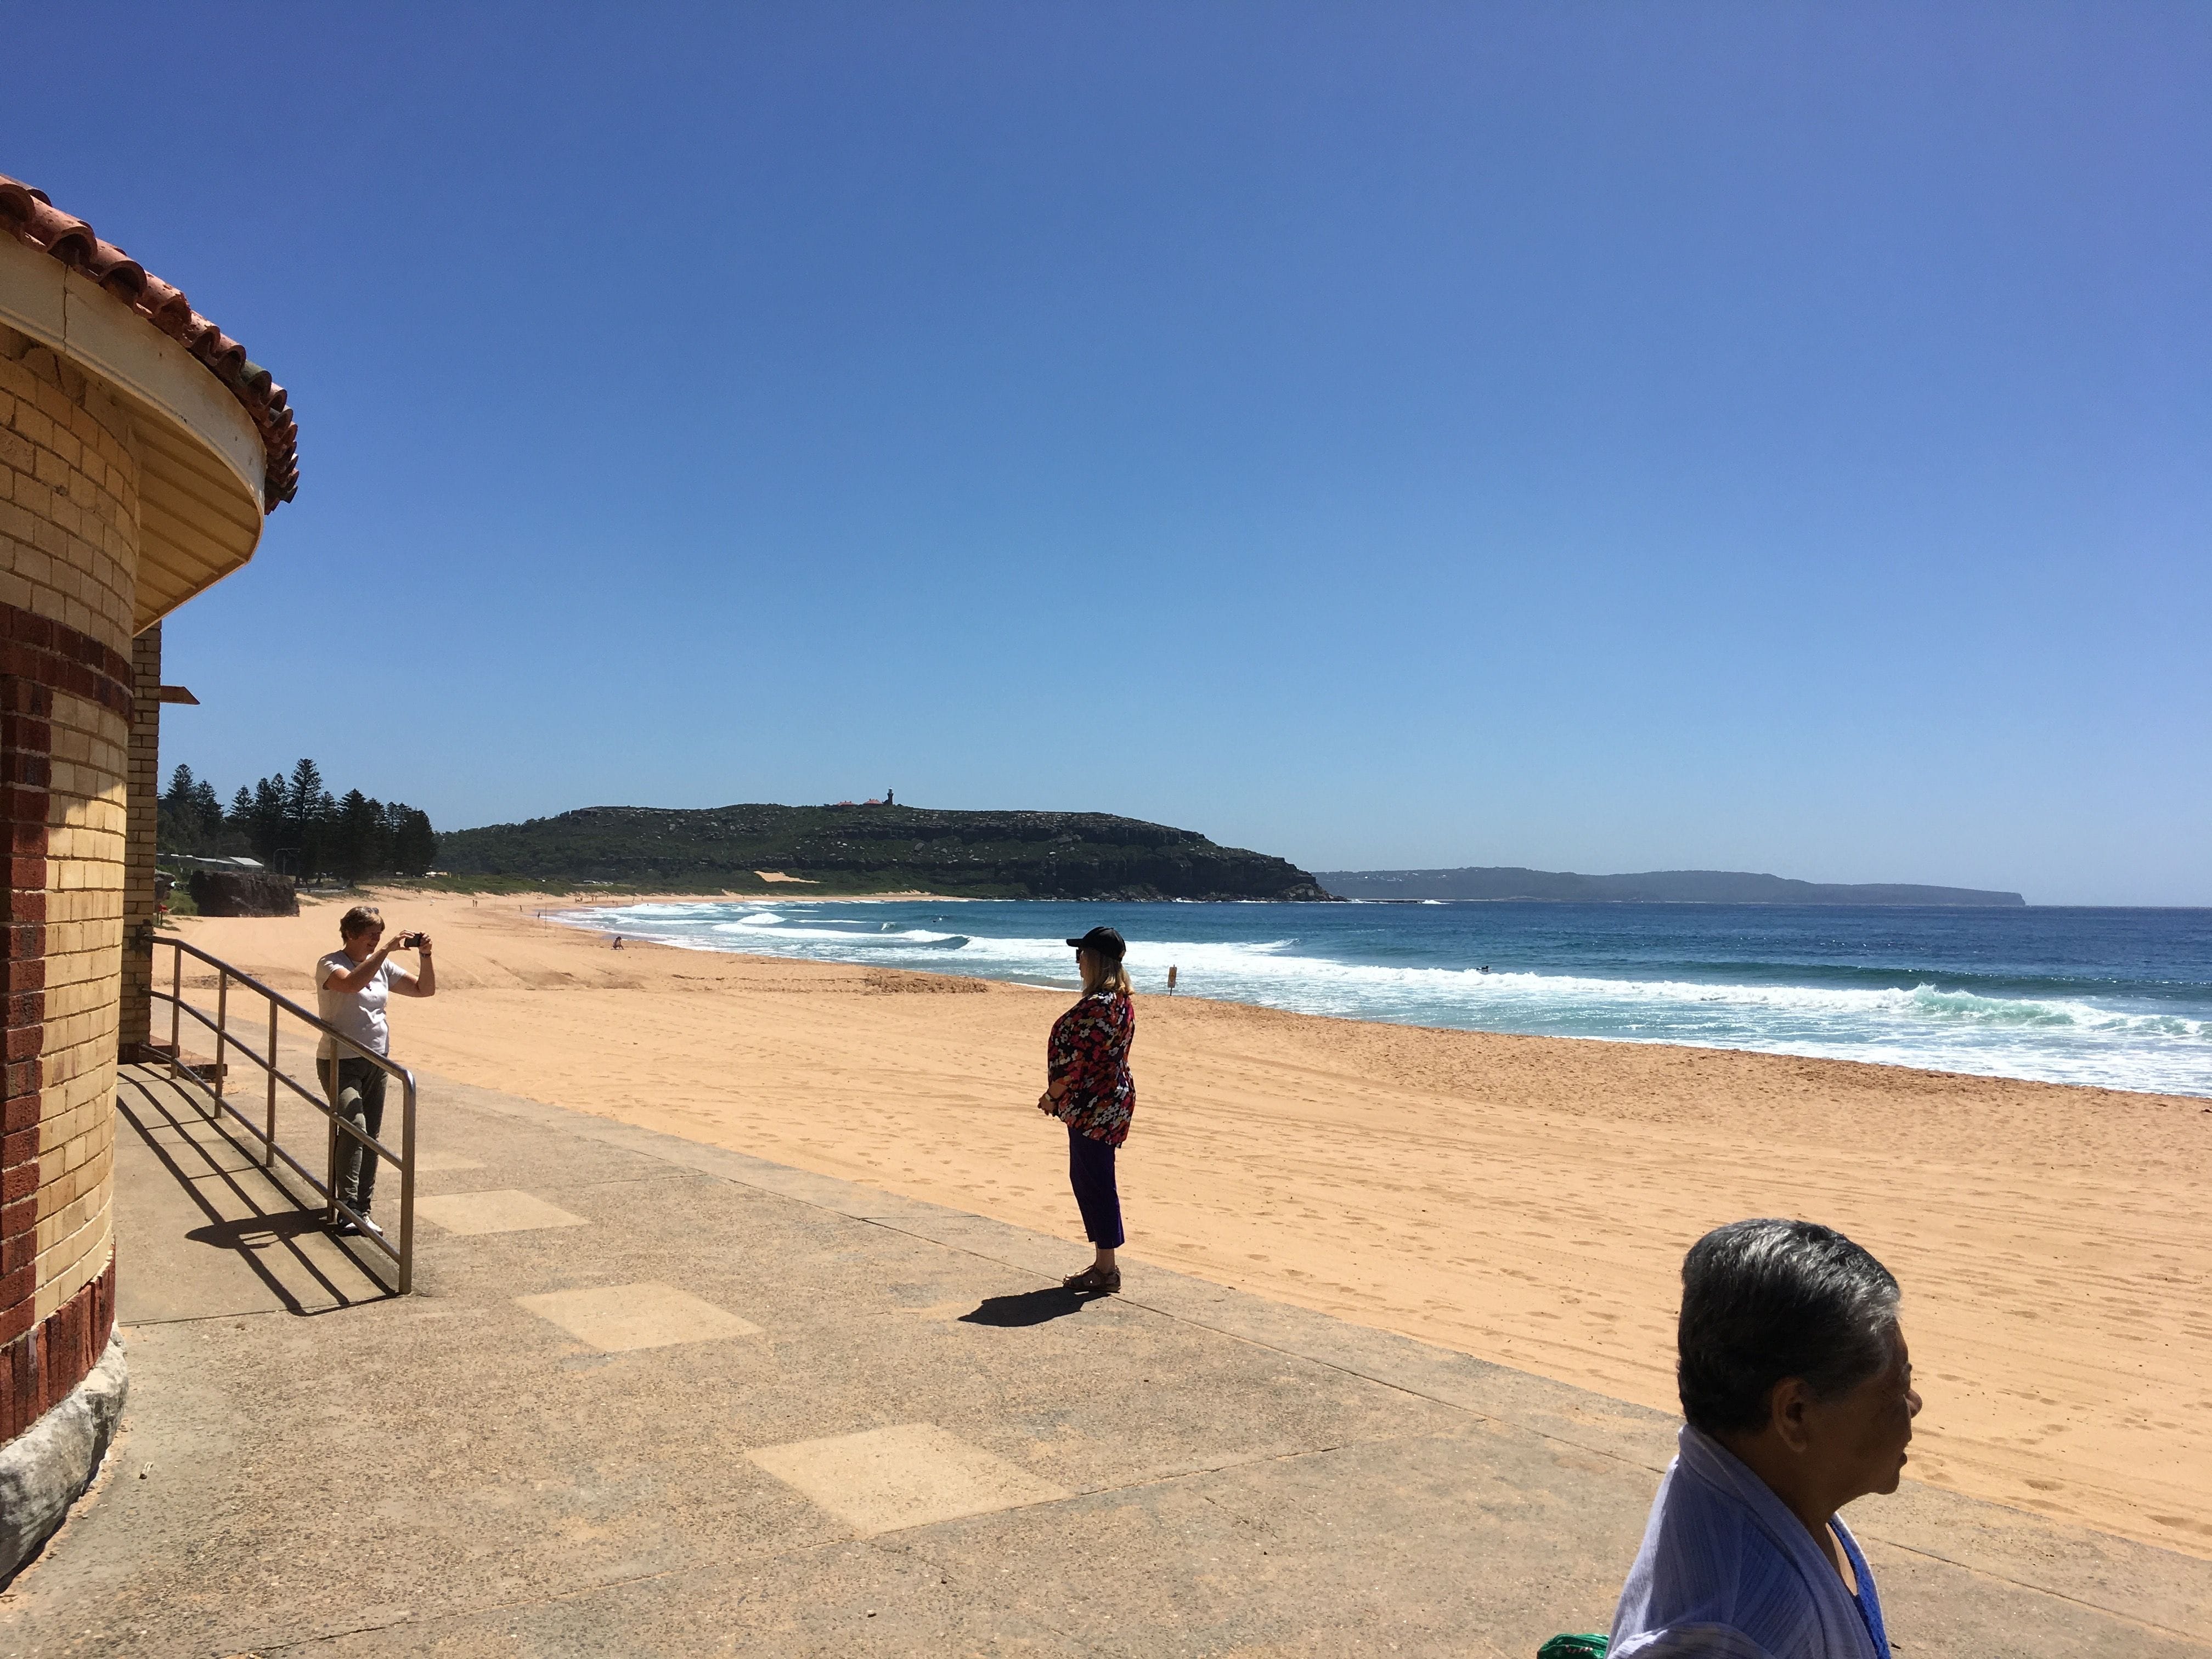 Northern Beaches Public Day Tour febuary 2019 Image -5c6496761f624